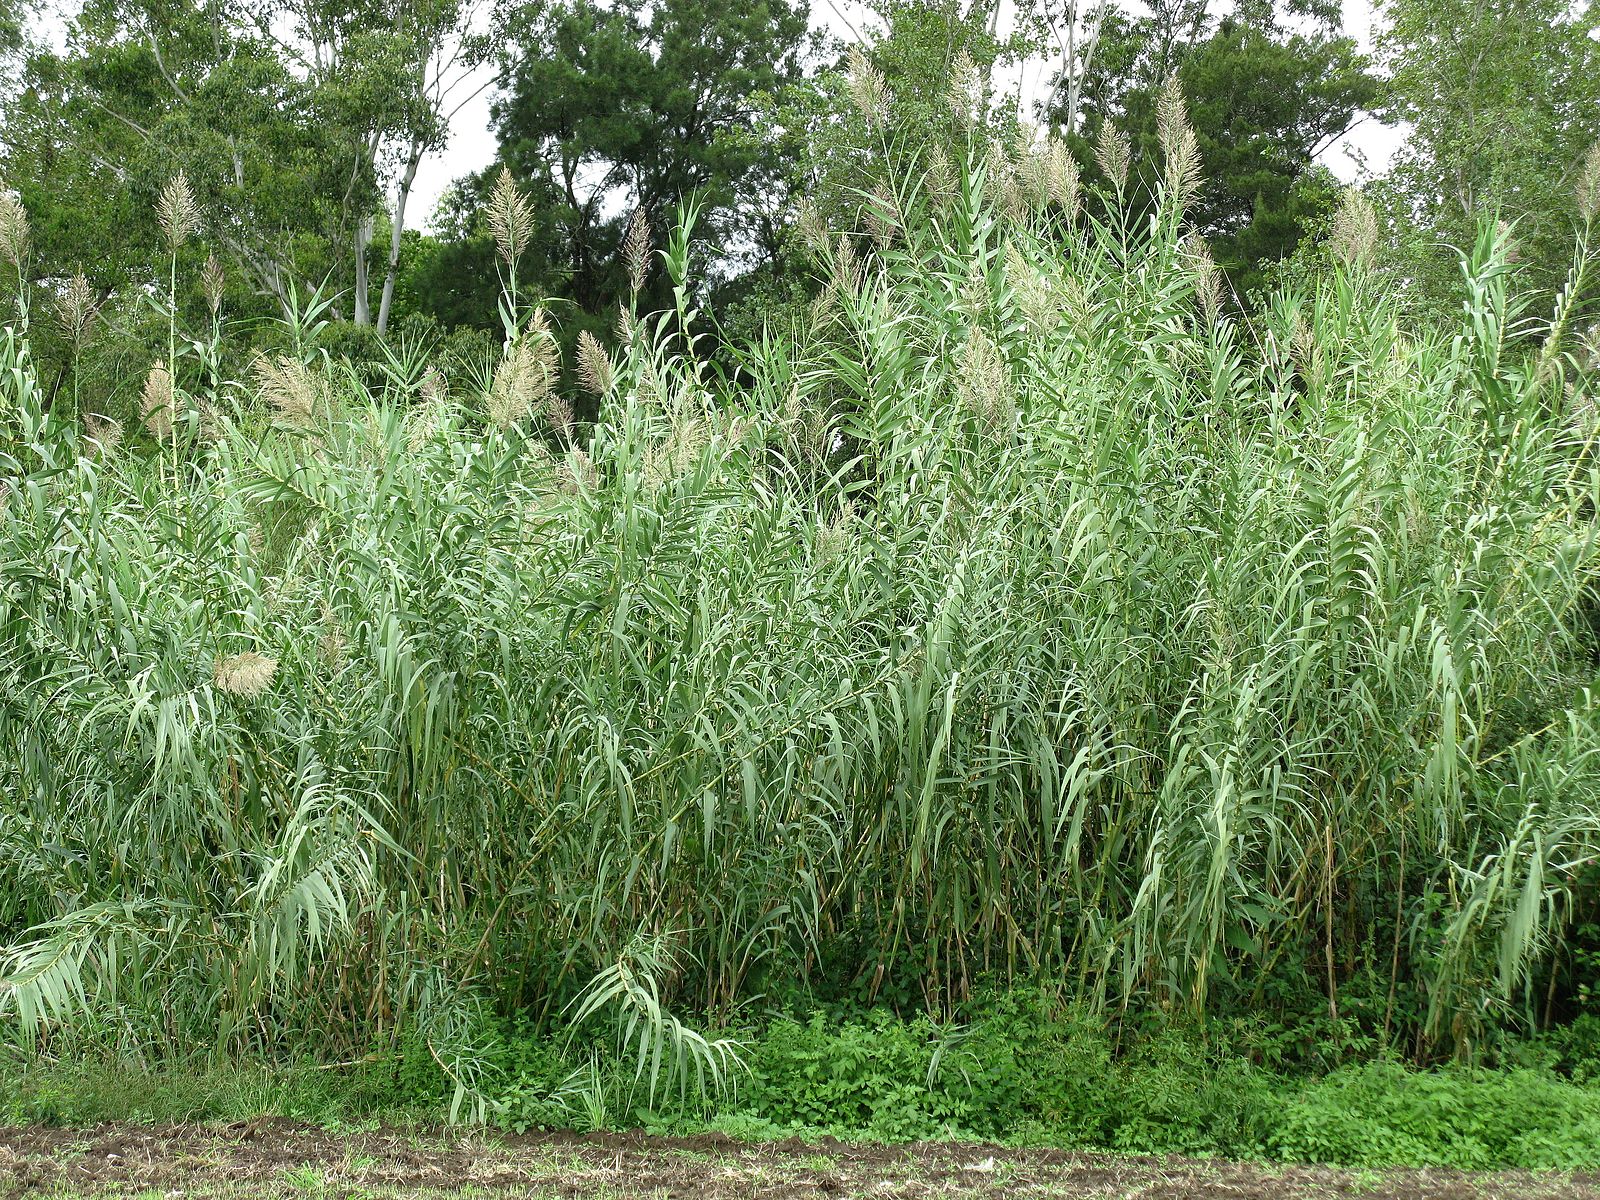 Densely packed tall grassy plants with large tassel-like flowers.